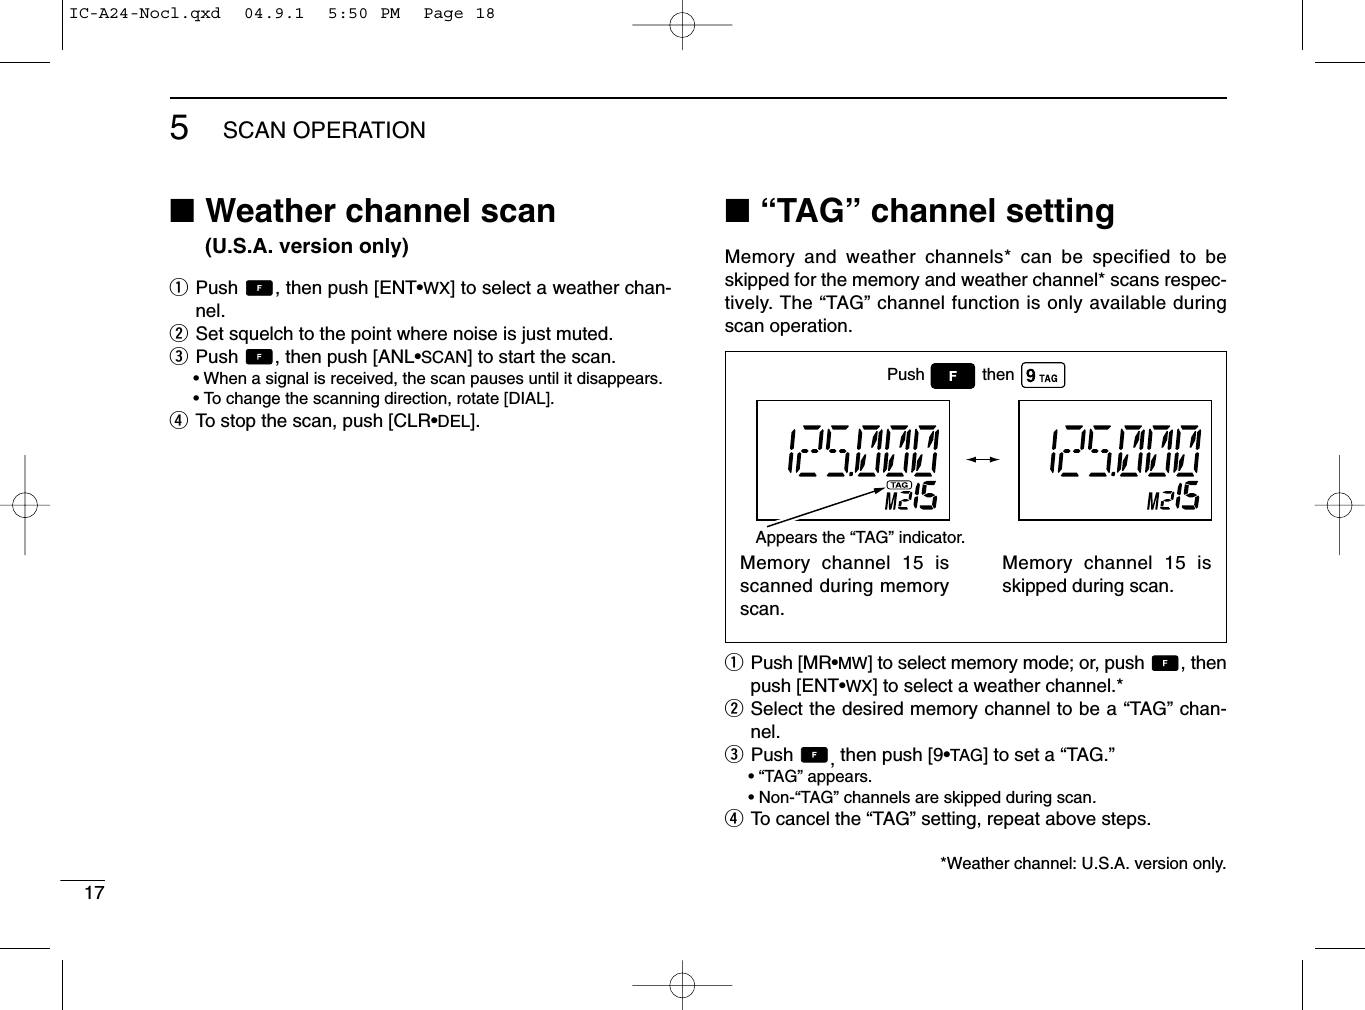 175SCAN OPERATION■Weather channel scan (U.S.A. version only)qPush  , then push [ENT•WX] to select a weather chan-nel.wSet squelch to the point where noise is just muted.ePush  , then push [ANL•SCAN] to start the scan.• When a signal is received, the scan pauses until it disappears.•To change the scanning direction, rotate [DIAL].rTo stop the scan, push [CLR•DEL].■“TAG” channel settingMemory and weather channels* can be specified to beskipped for the memory and weather channel* scans respec-tively. The “TAG” channel function is only available duringscan operation.qPush [MR•MW] to select memory mode; or, push  , thenpush [ENT•WX] to select a weather channel.*wSelect the desired memory channel to be a “TAG” chan-nel.ePush  ,then push [9•TAG] to set a “TAG.”•“TAG” appears.•Non-“TAG” channels are skipped during scan.rTo cancel the “TAG” setting, repeat above steps.*Weather channel: U.S.A. version only.Memory channel 15 isscanned during memoryscan.Memory channel 15 isskipped during scan.Push thenAppears the “TAG” indicator.IC-A24-Nocl.qxd  04.9.1  5:50 PM  Page 18